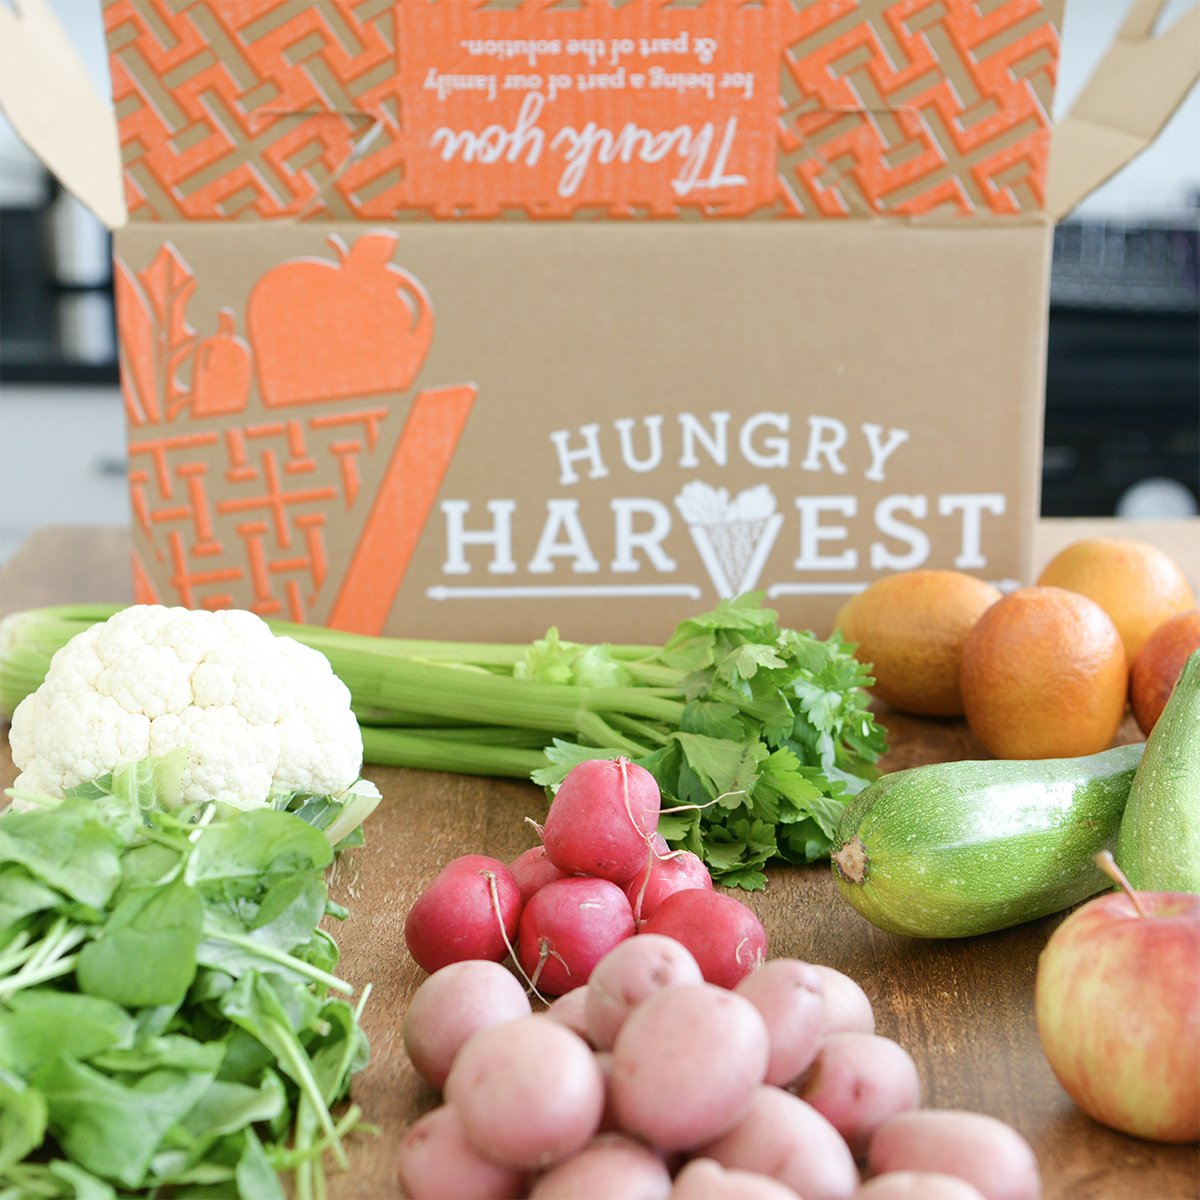 Hungry Harvest Provides Food Box Subscriptions With a Purpose